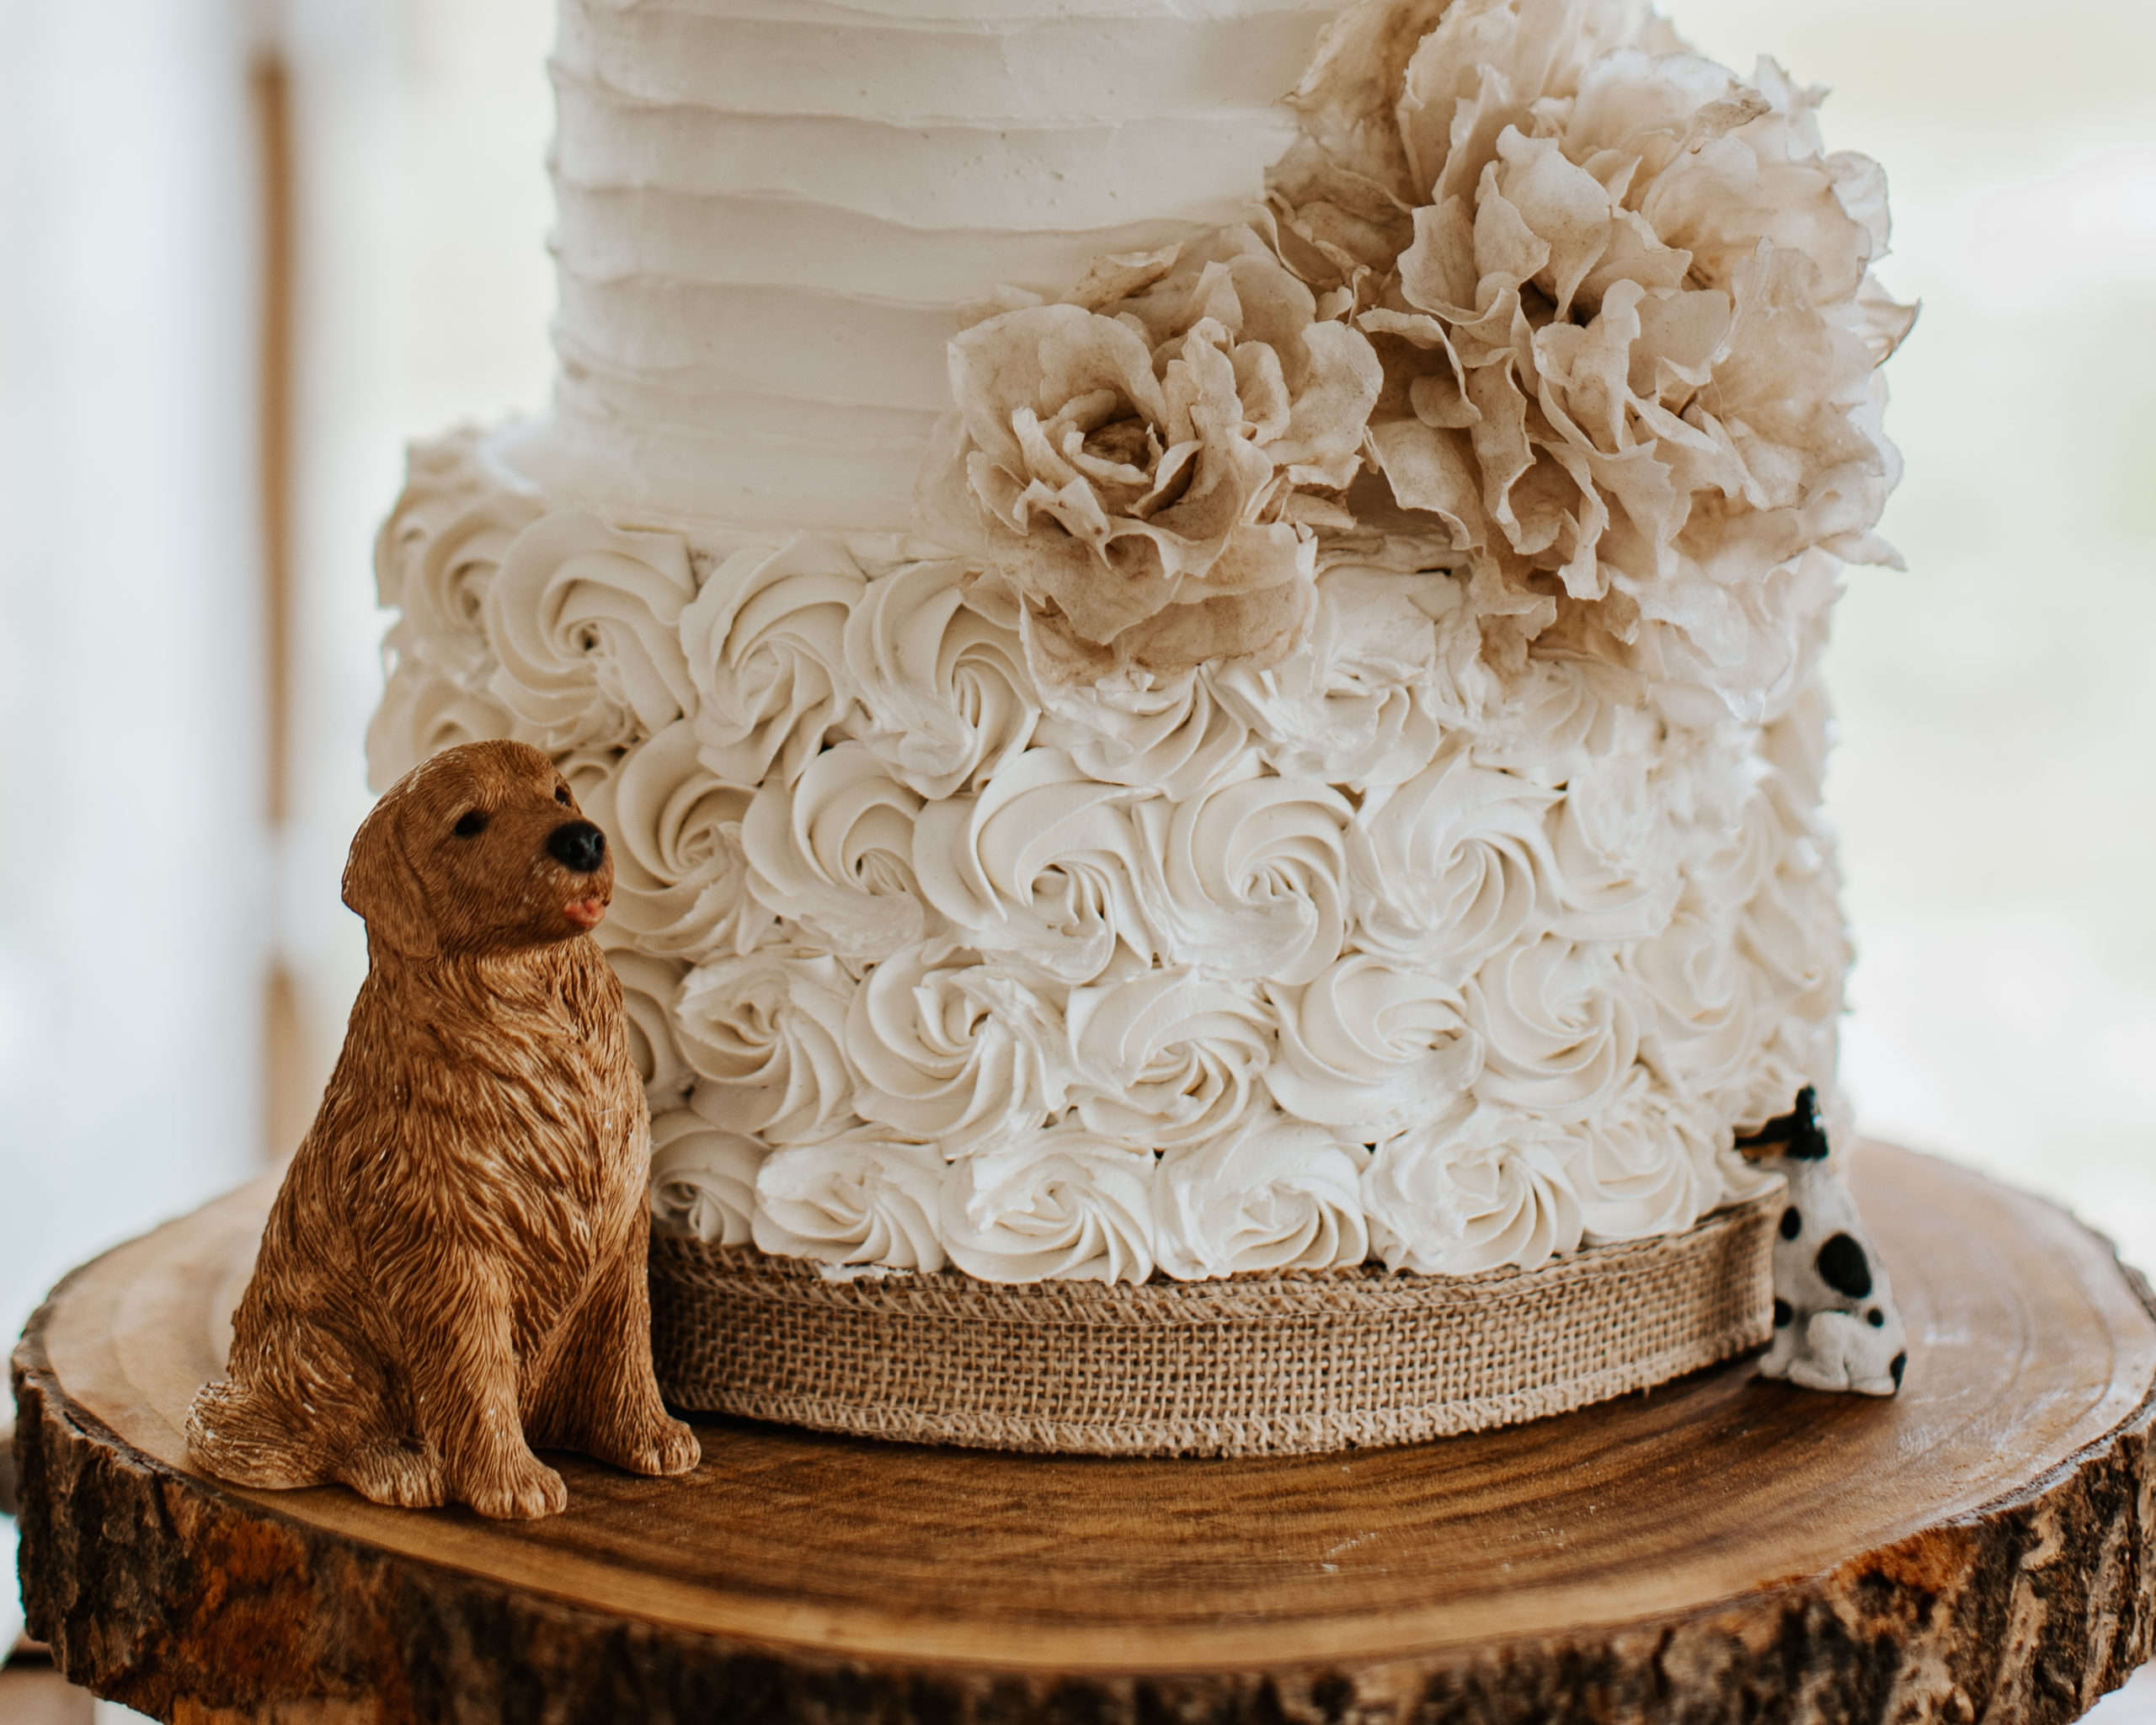 A beautiful 2-tier custom wedding cake with buttercream rosettes and wafer paper flowers for a destination wedding, from Village Patisserie in Toledo, Ohio